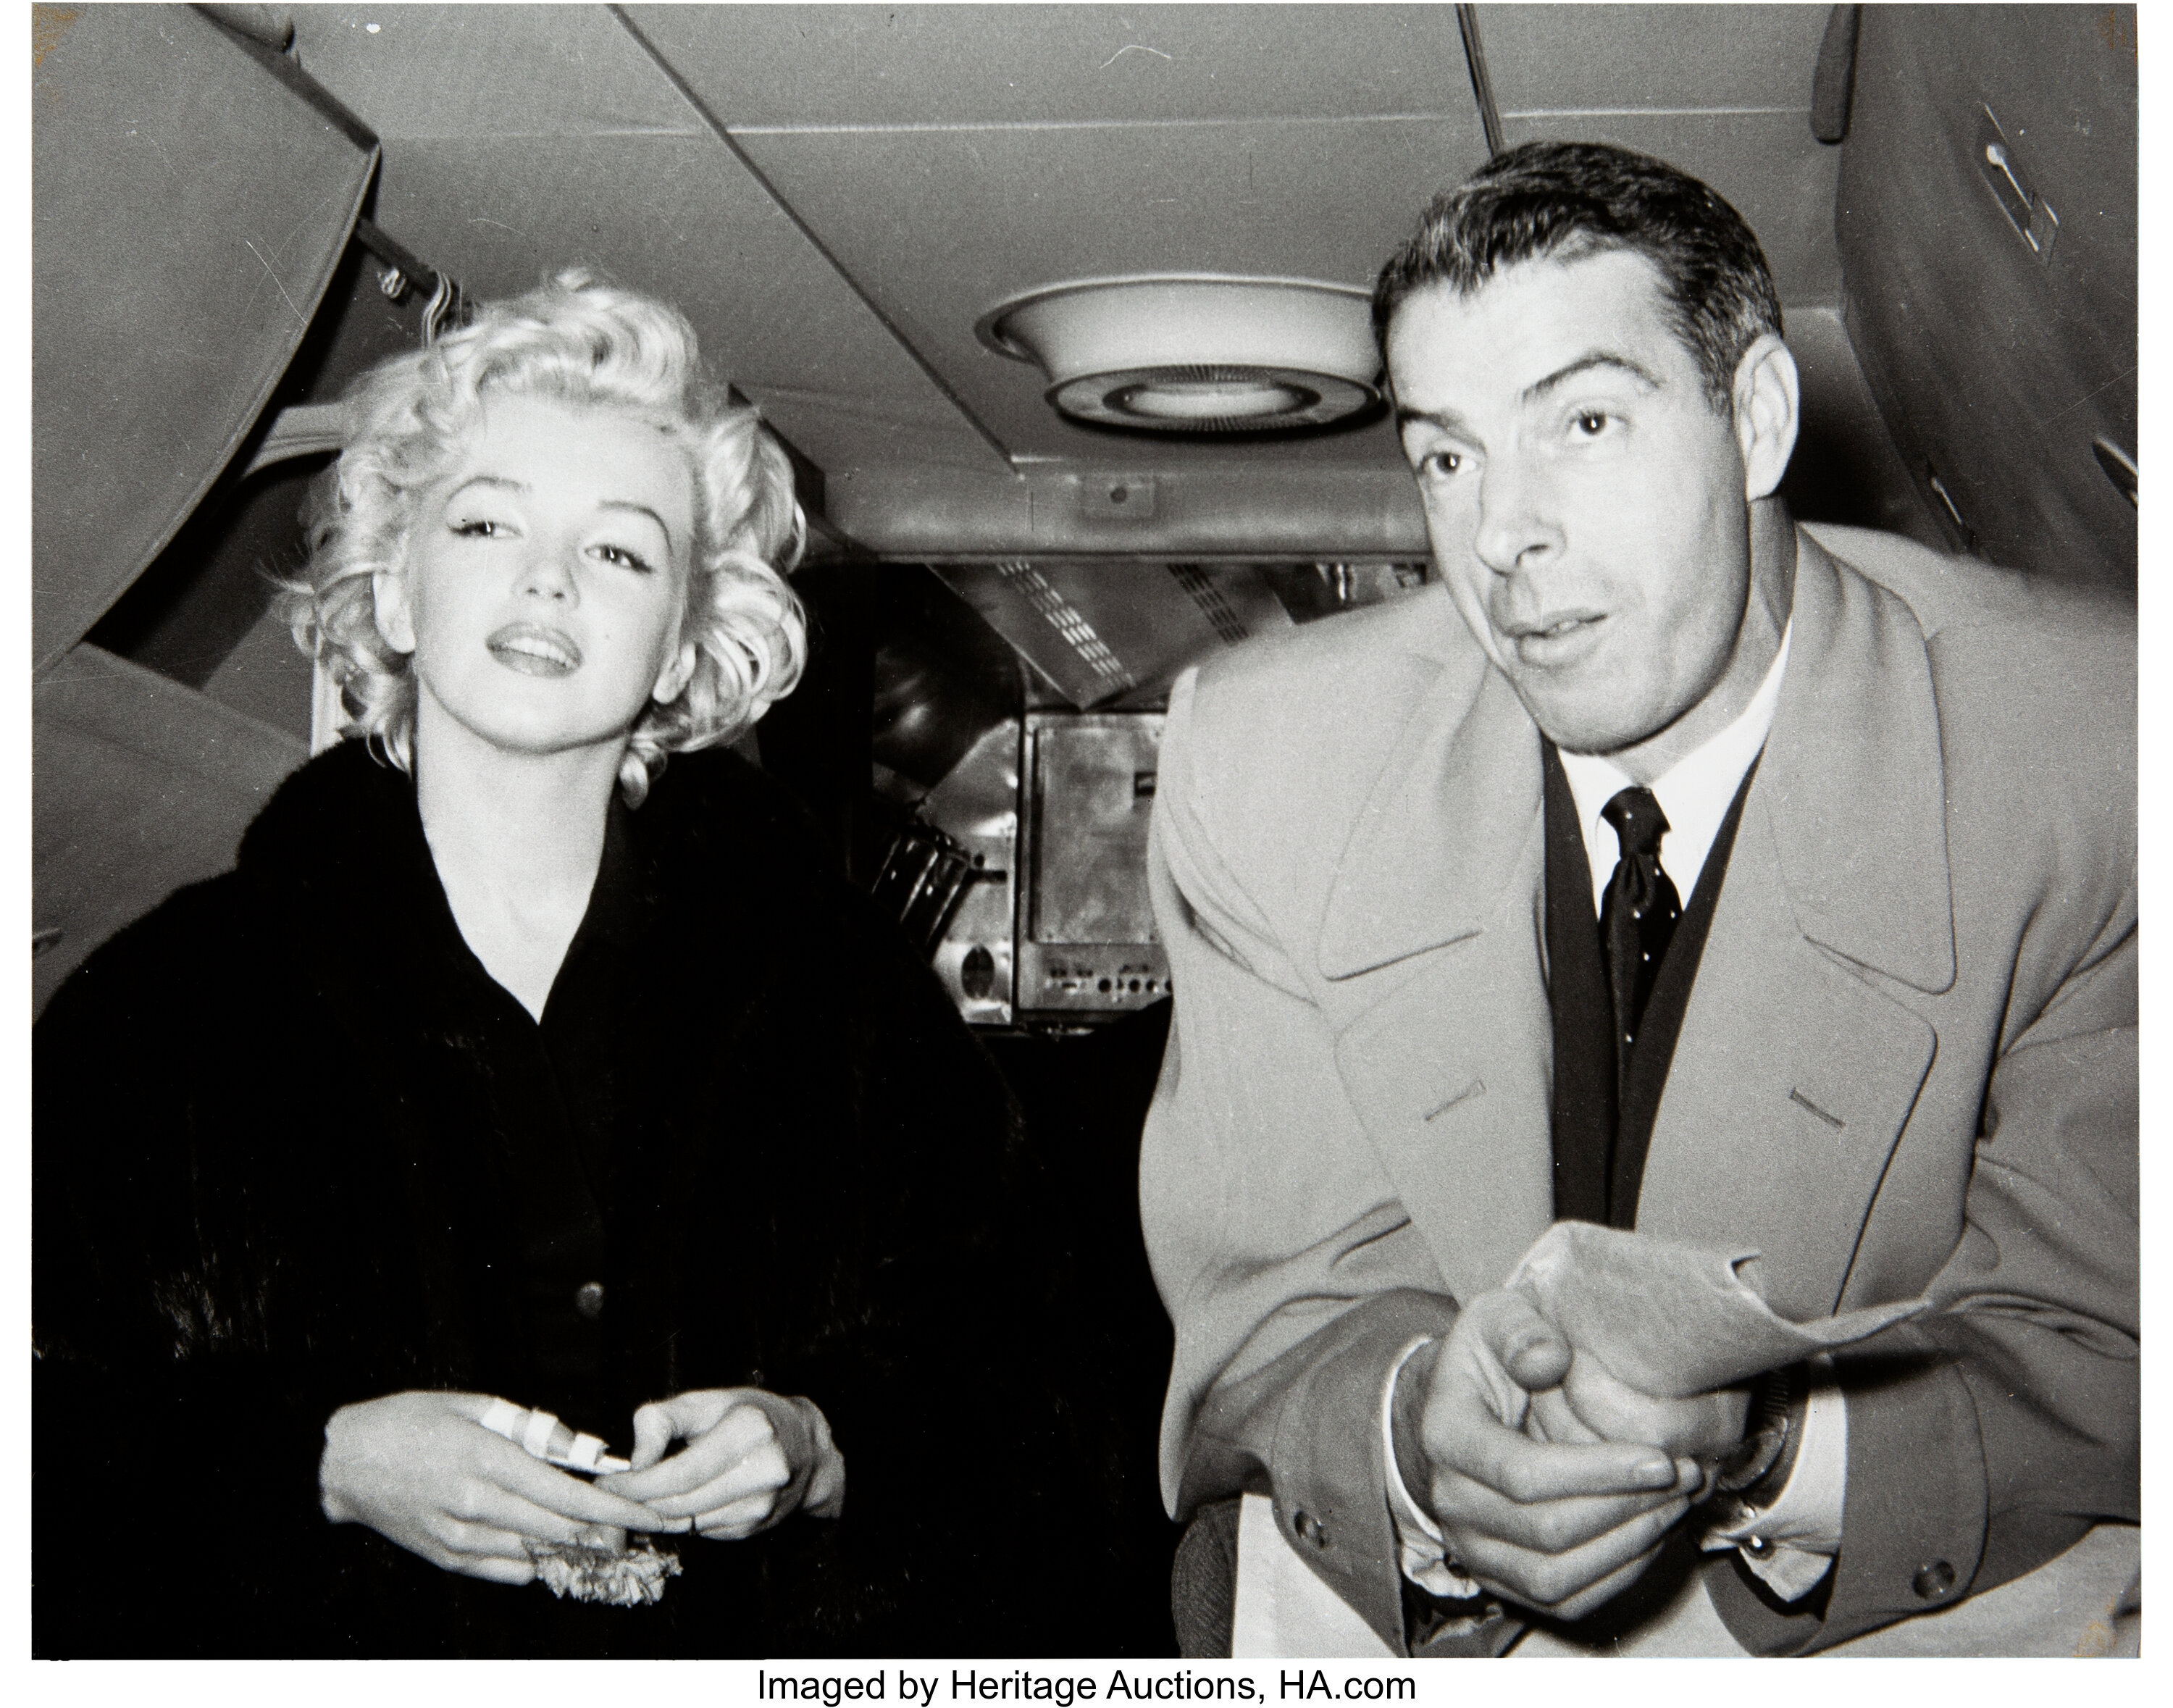 Joe DiMaggio Marilyn Monroe signed photo sells for $300,000 at